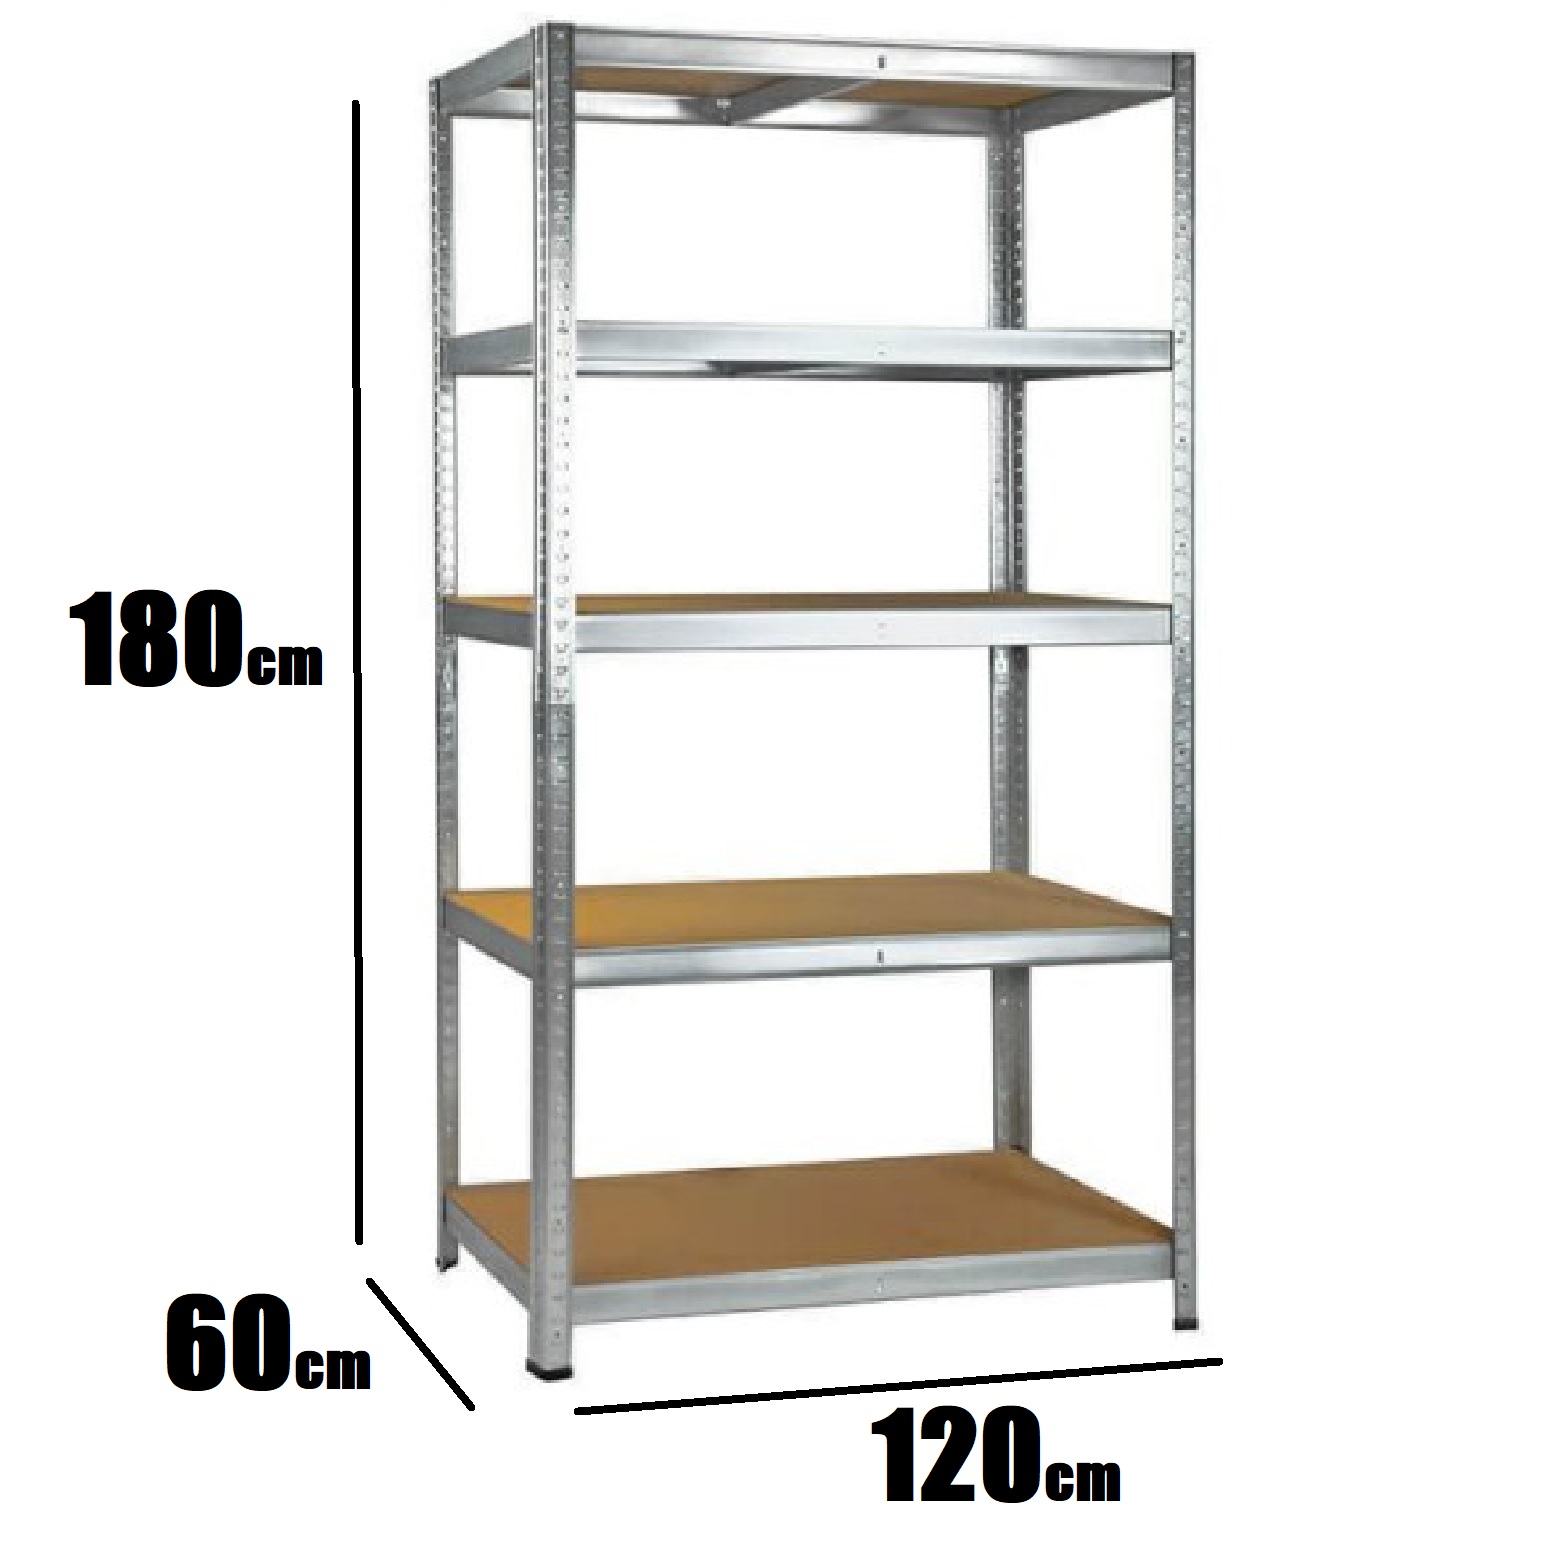 5 Tier Extra Large Heavy Duty Garage, 72 Wide Shelving Unit Dimensions